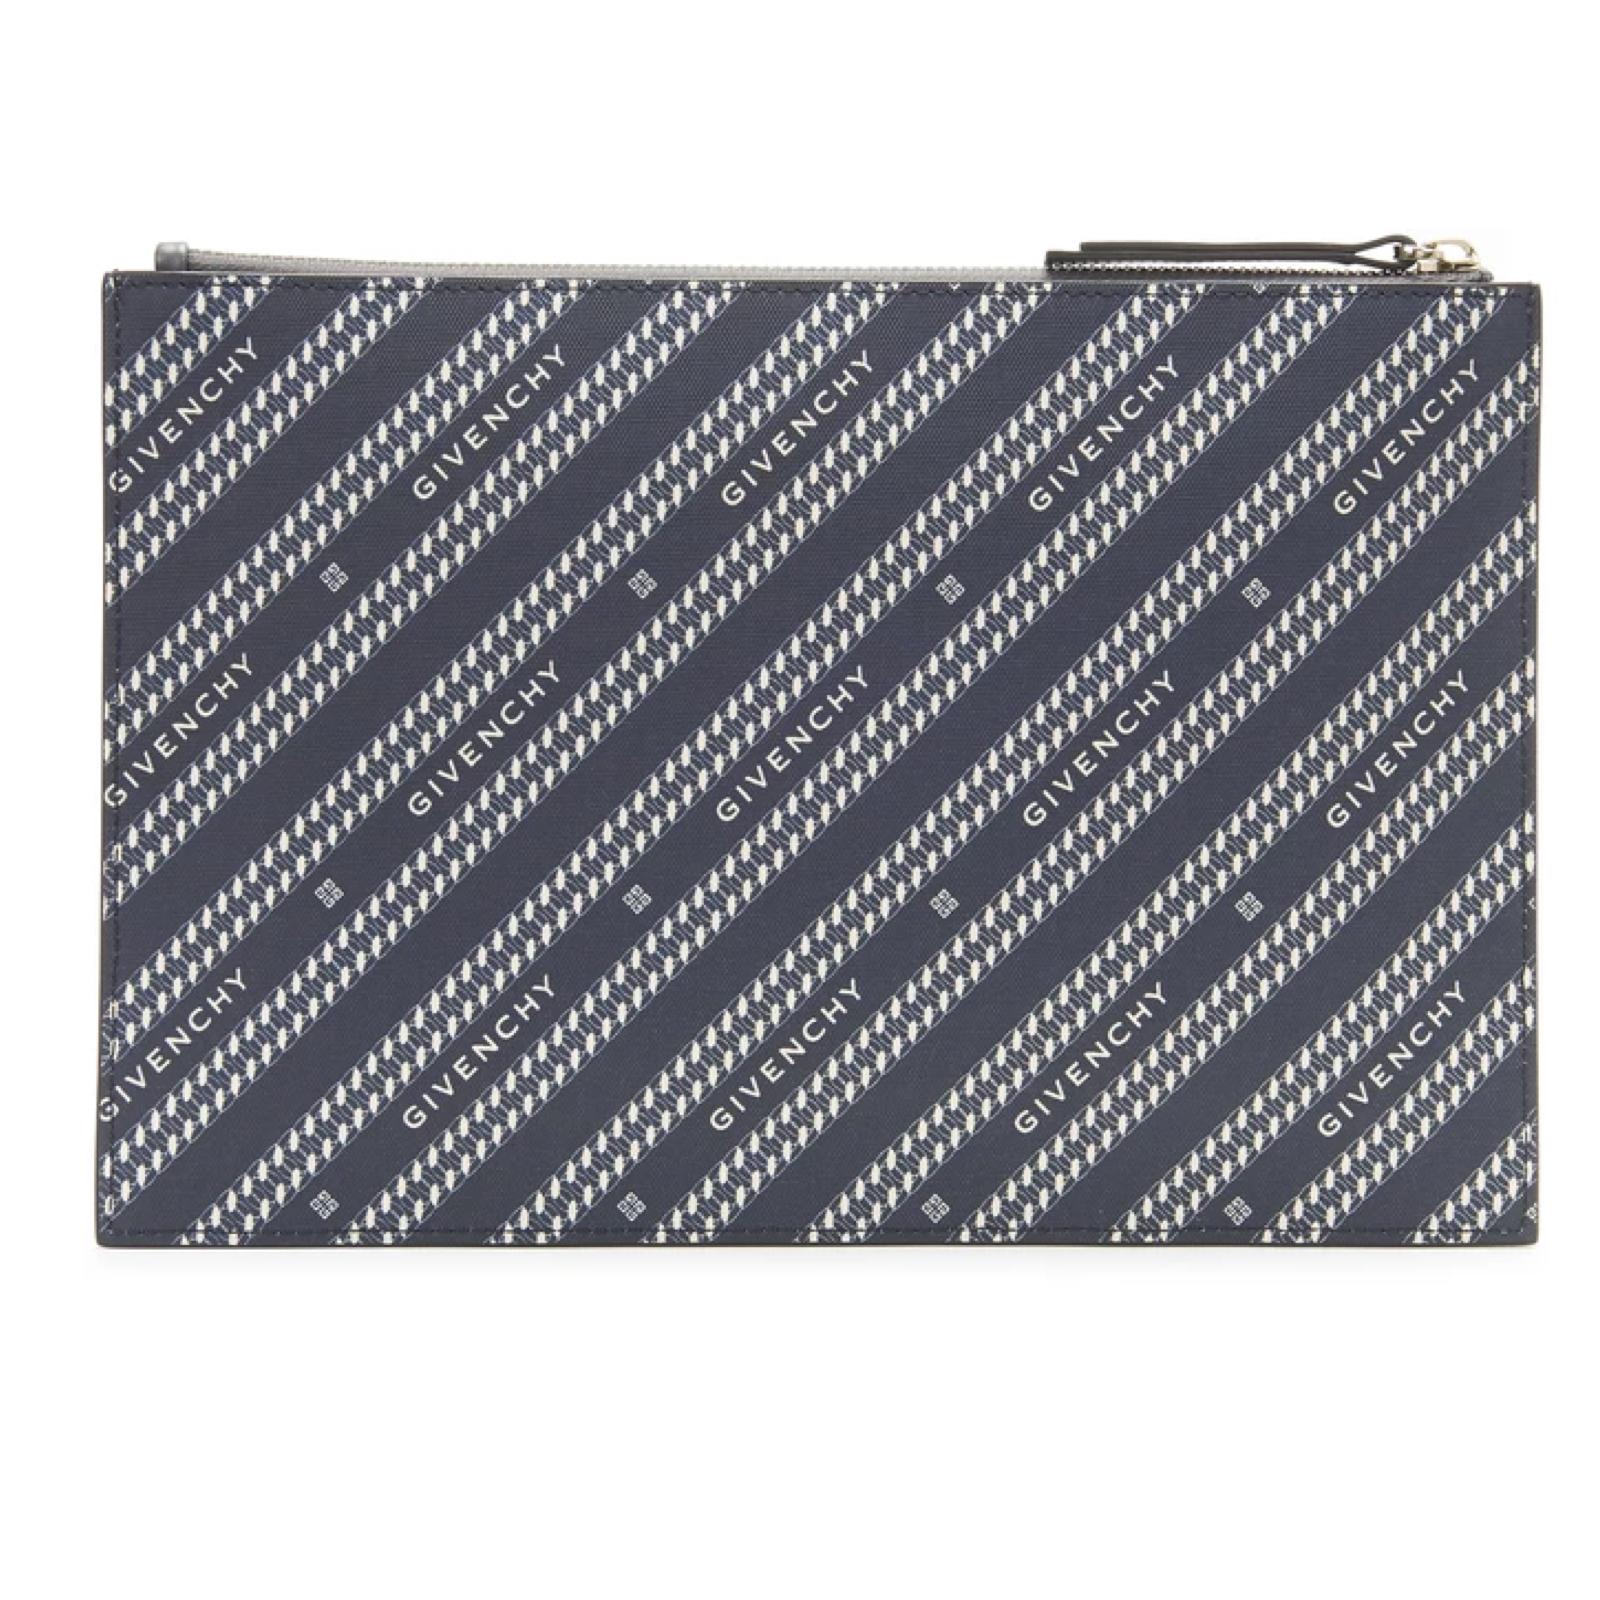 The medium Bond pouch in coated canvas features Givenchy's signature in a printed contrast chain. This pouch is equipped with a zip fastening and a flat interior pocket.

COLOR: Navy
MATERIAL: Coated canvas 
ITEM CODE: NED0220
MEASURES: L 7.5” x W